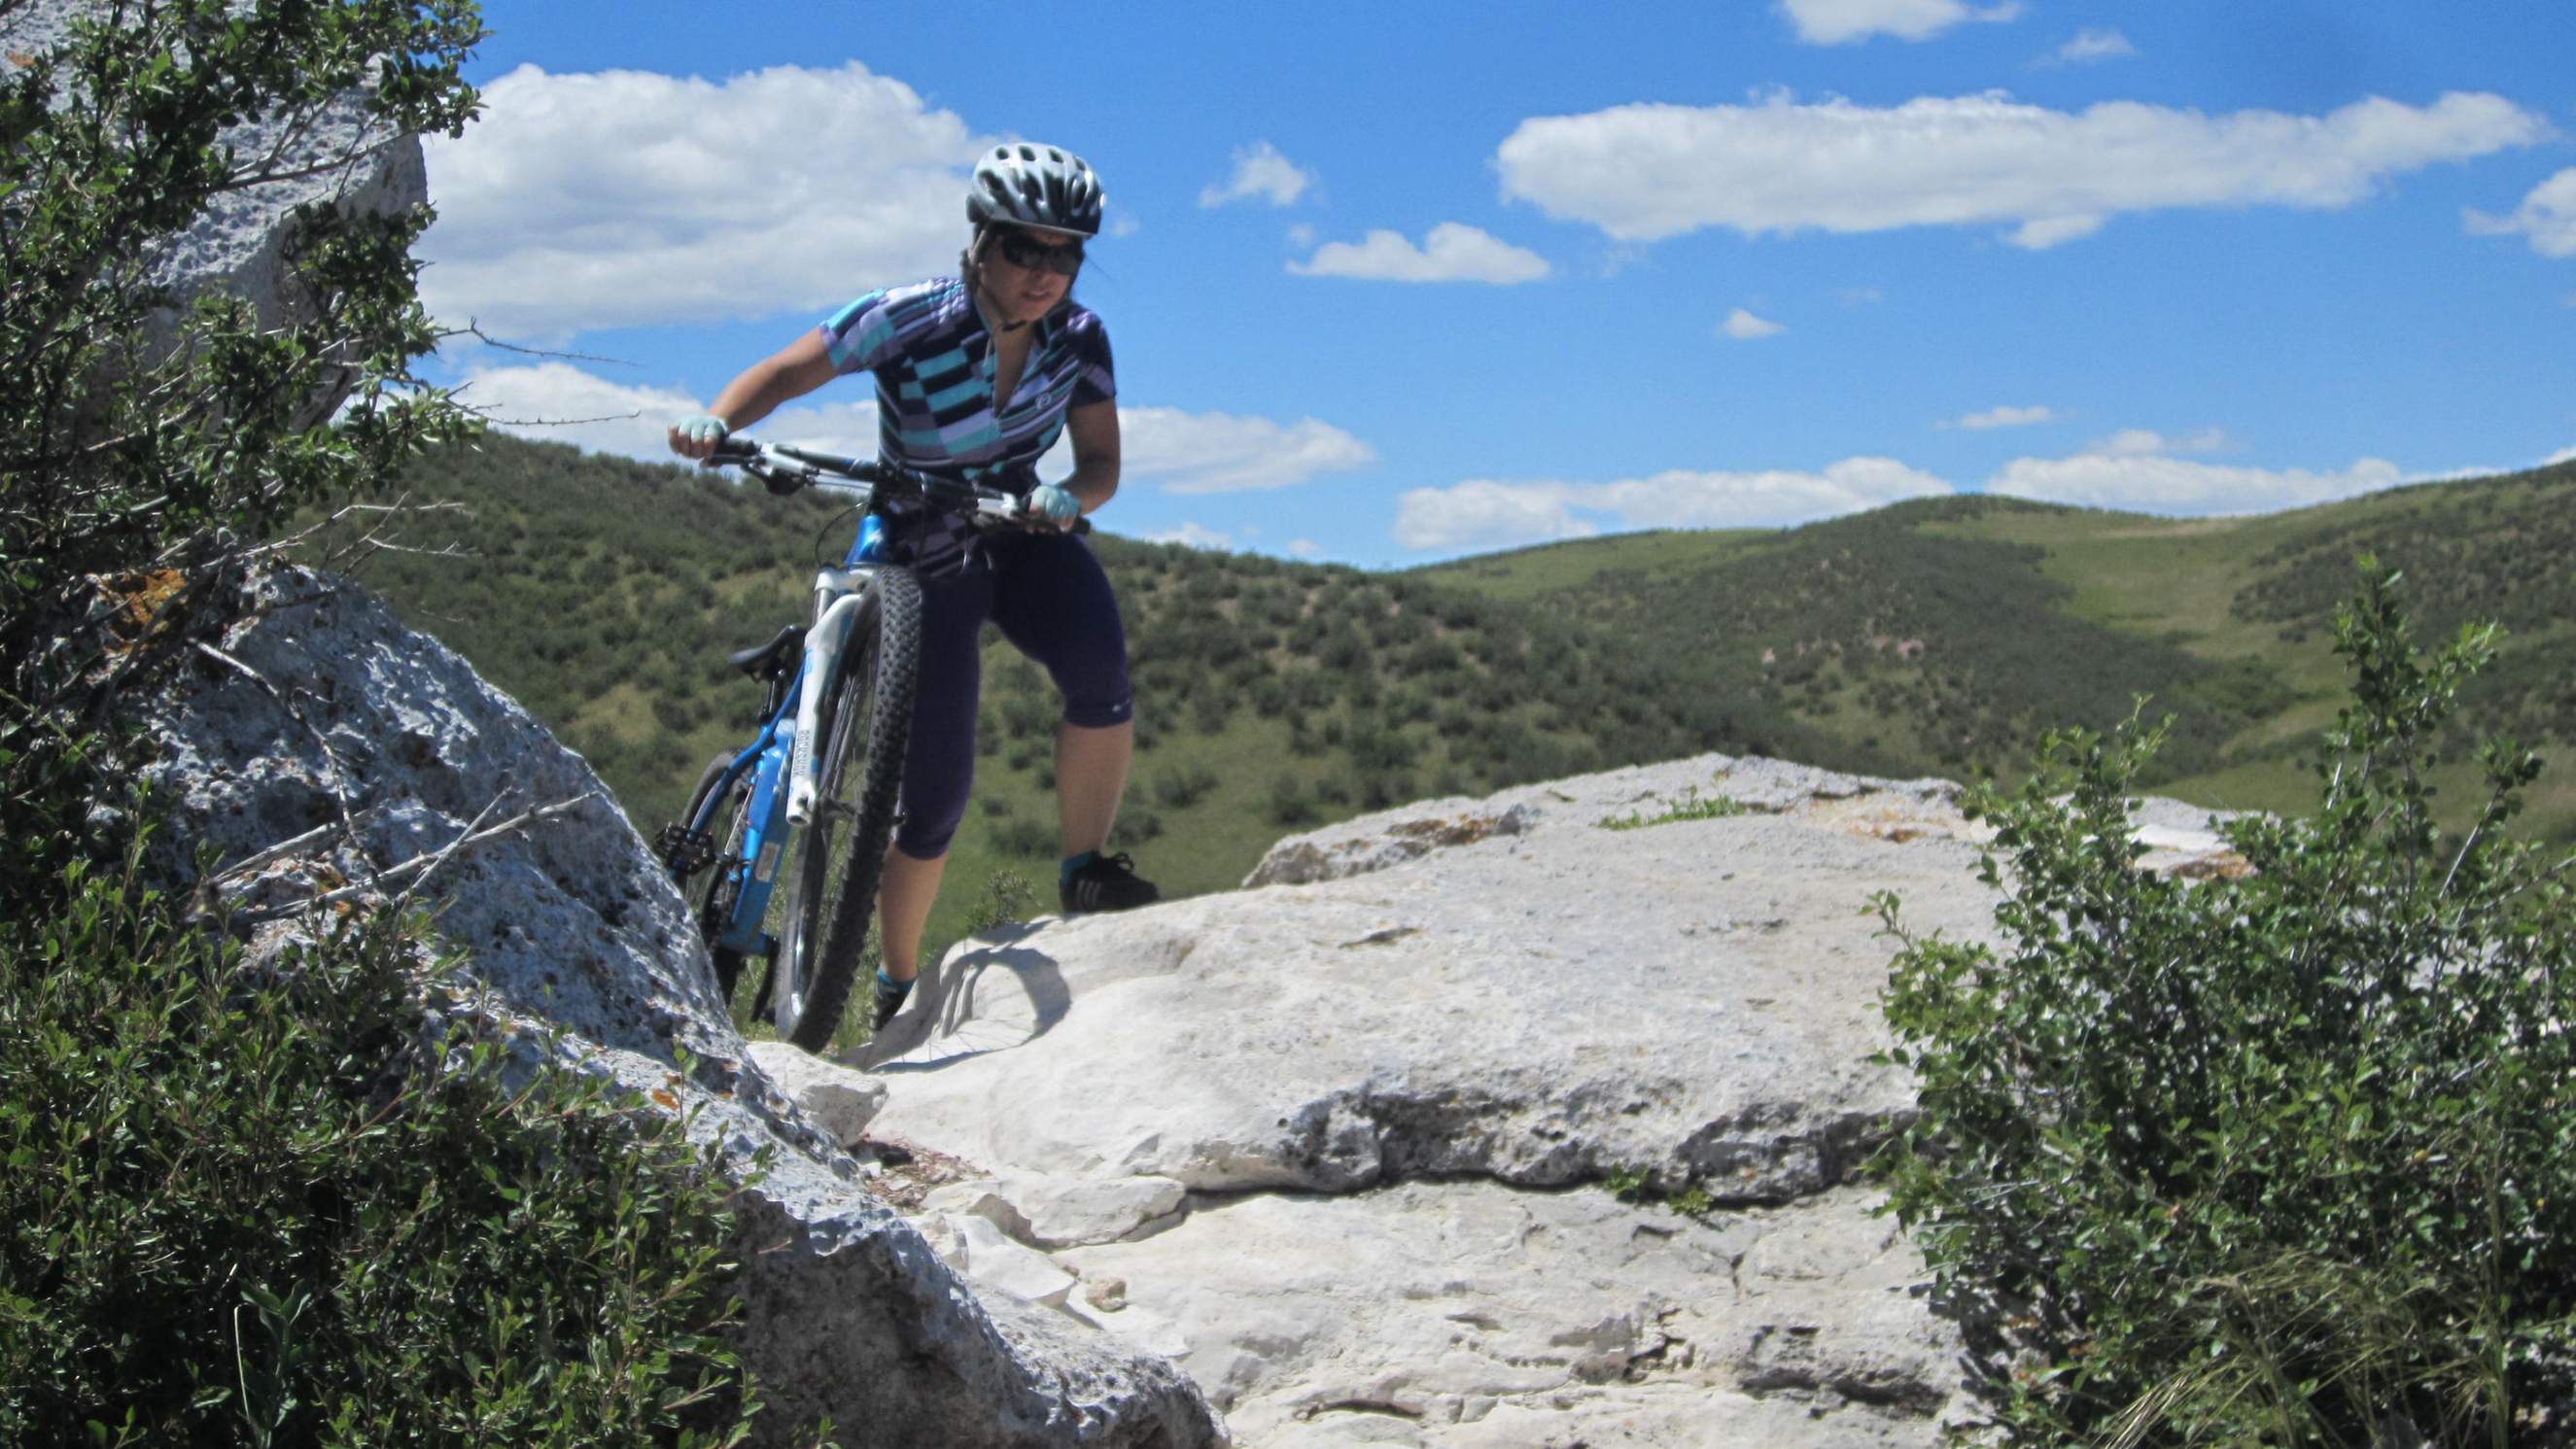 Thumbnail for More Articles About Mountain Biking